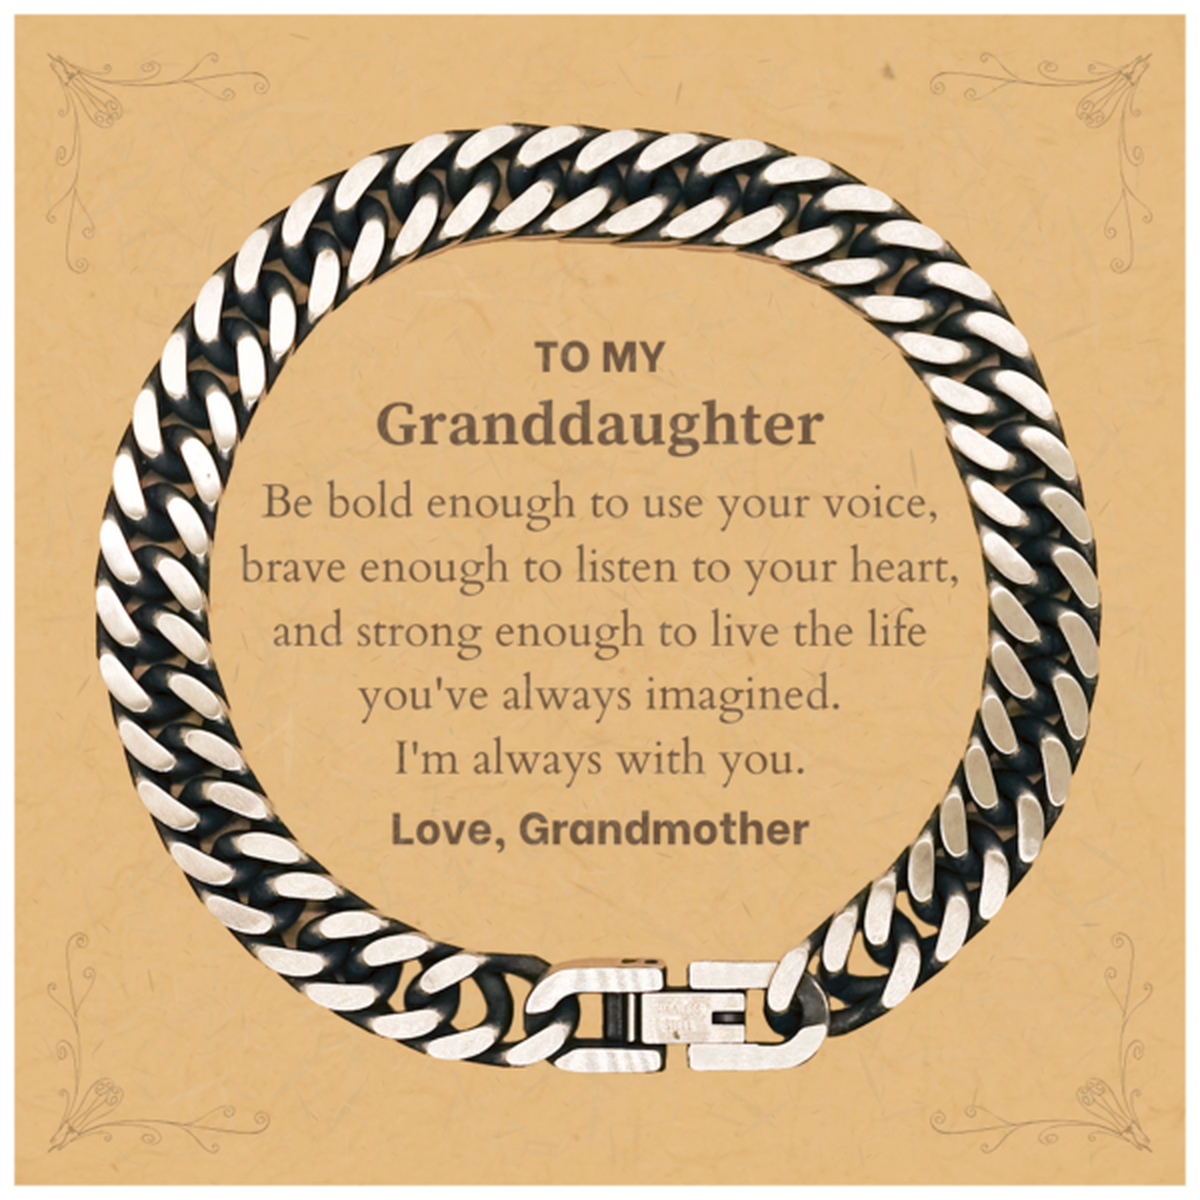 Keepsake Granddaughter Cuban Link Chain Bracelet Gift Idea Graduation Christmas Birthday Granddaughter from Grandmother, Granddaughter Be bold enough to use your voice, brave enough to listen to your heart. Love, Grandmother